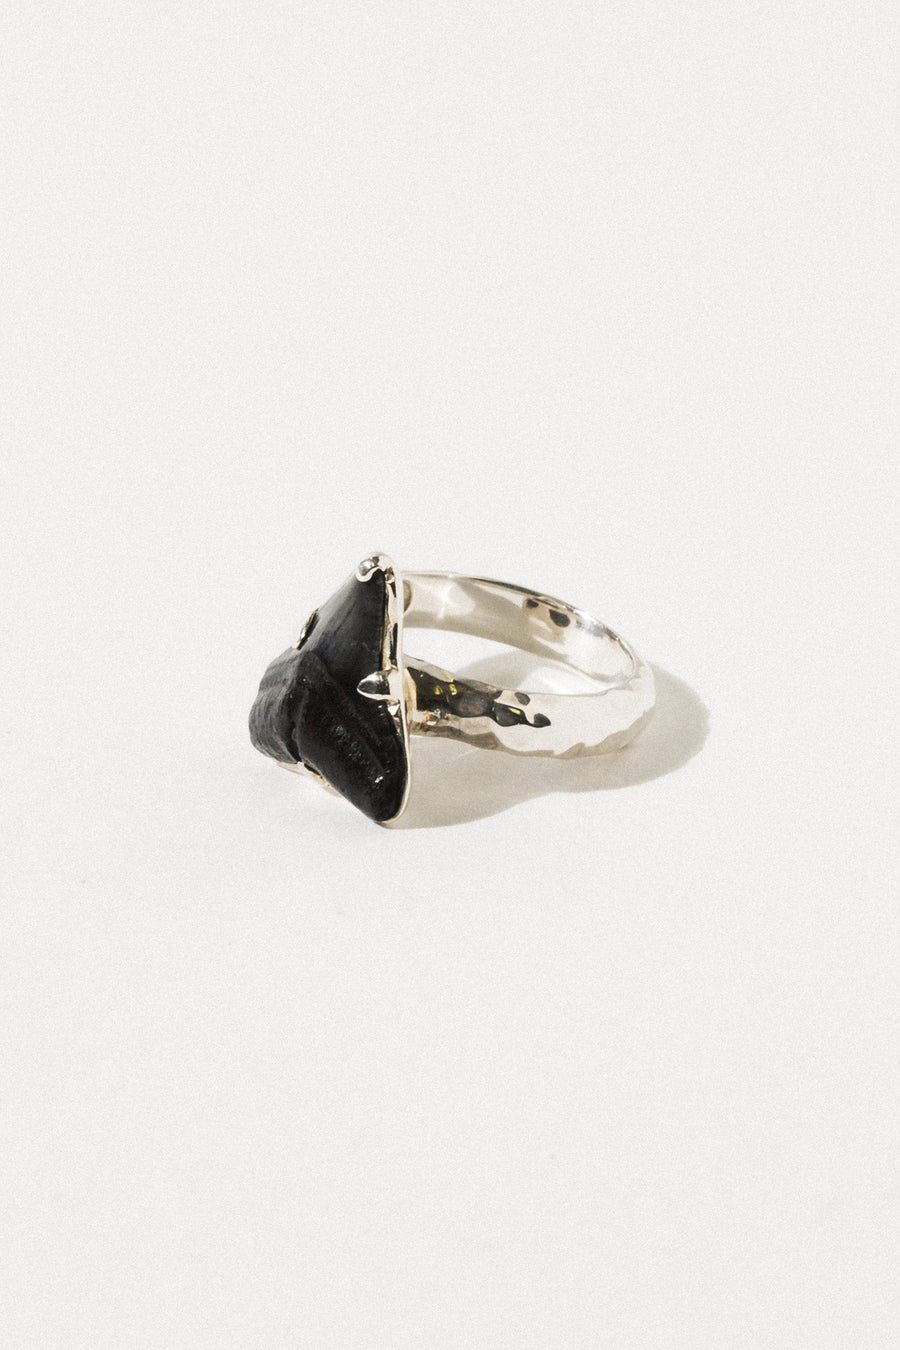 Starborn Creations Jewelry Palaemon Shark Tooth Ring